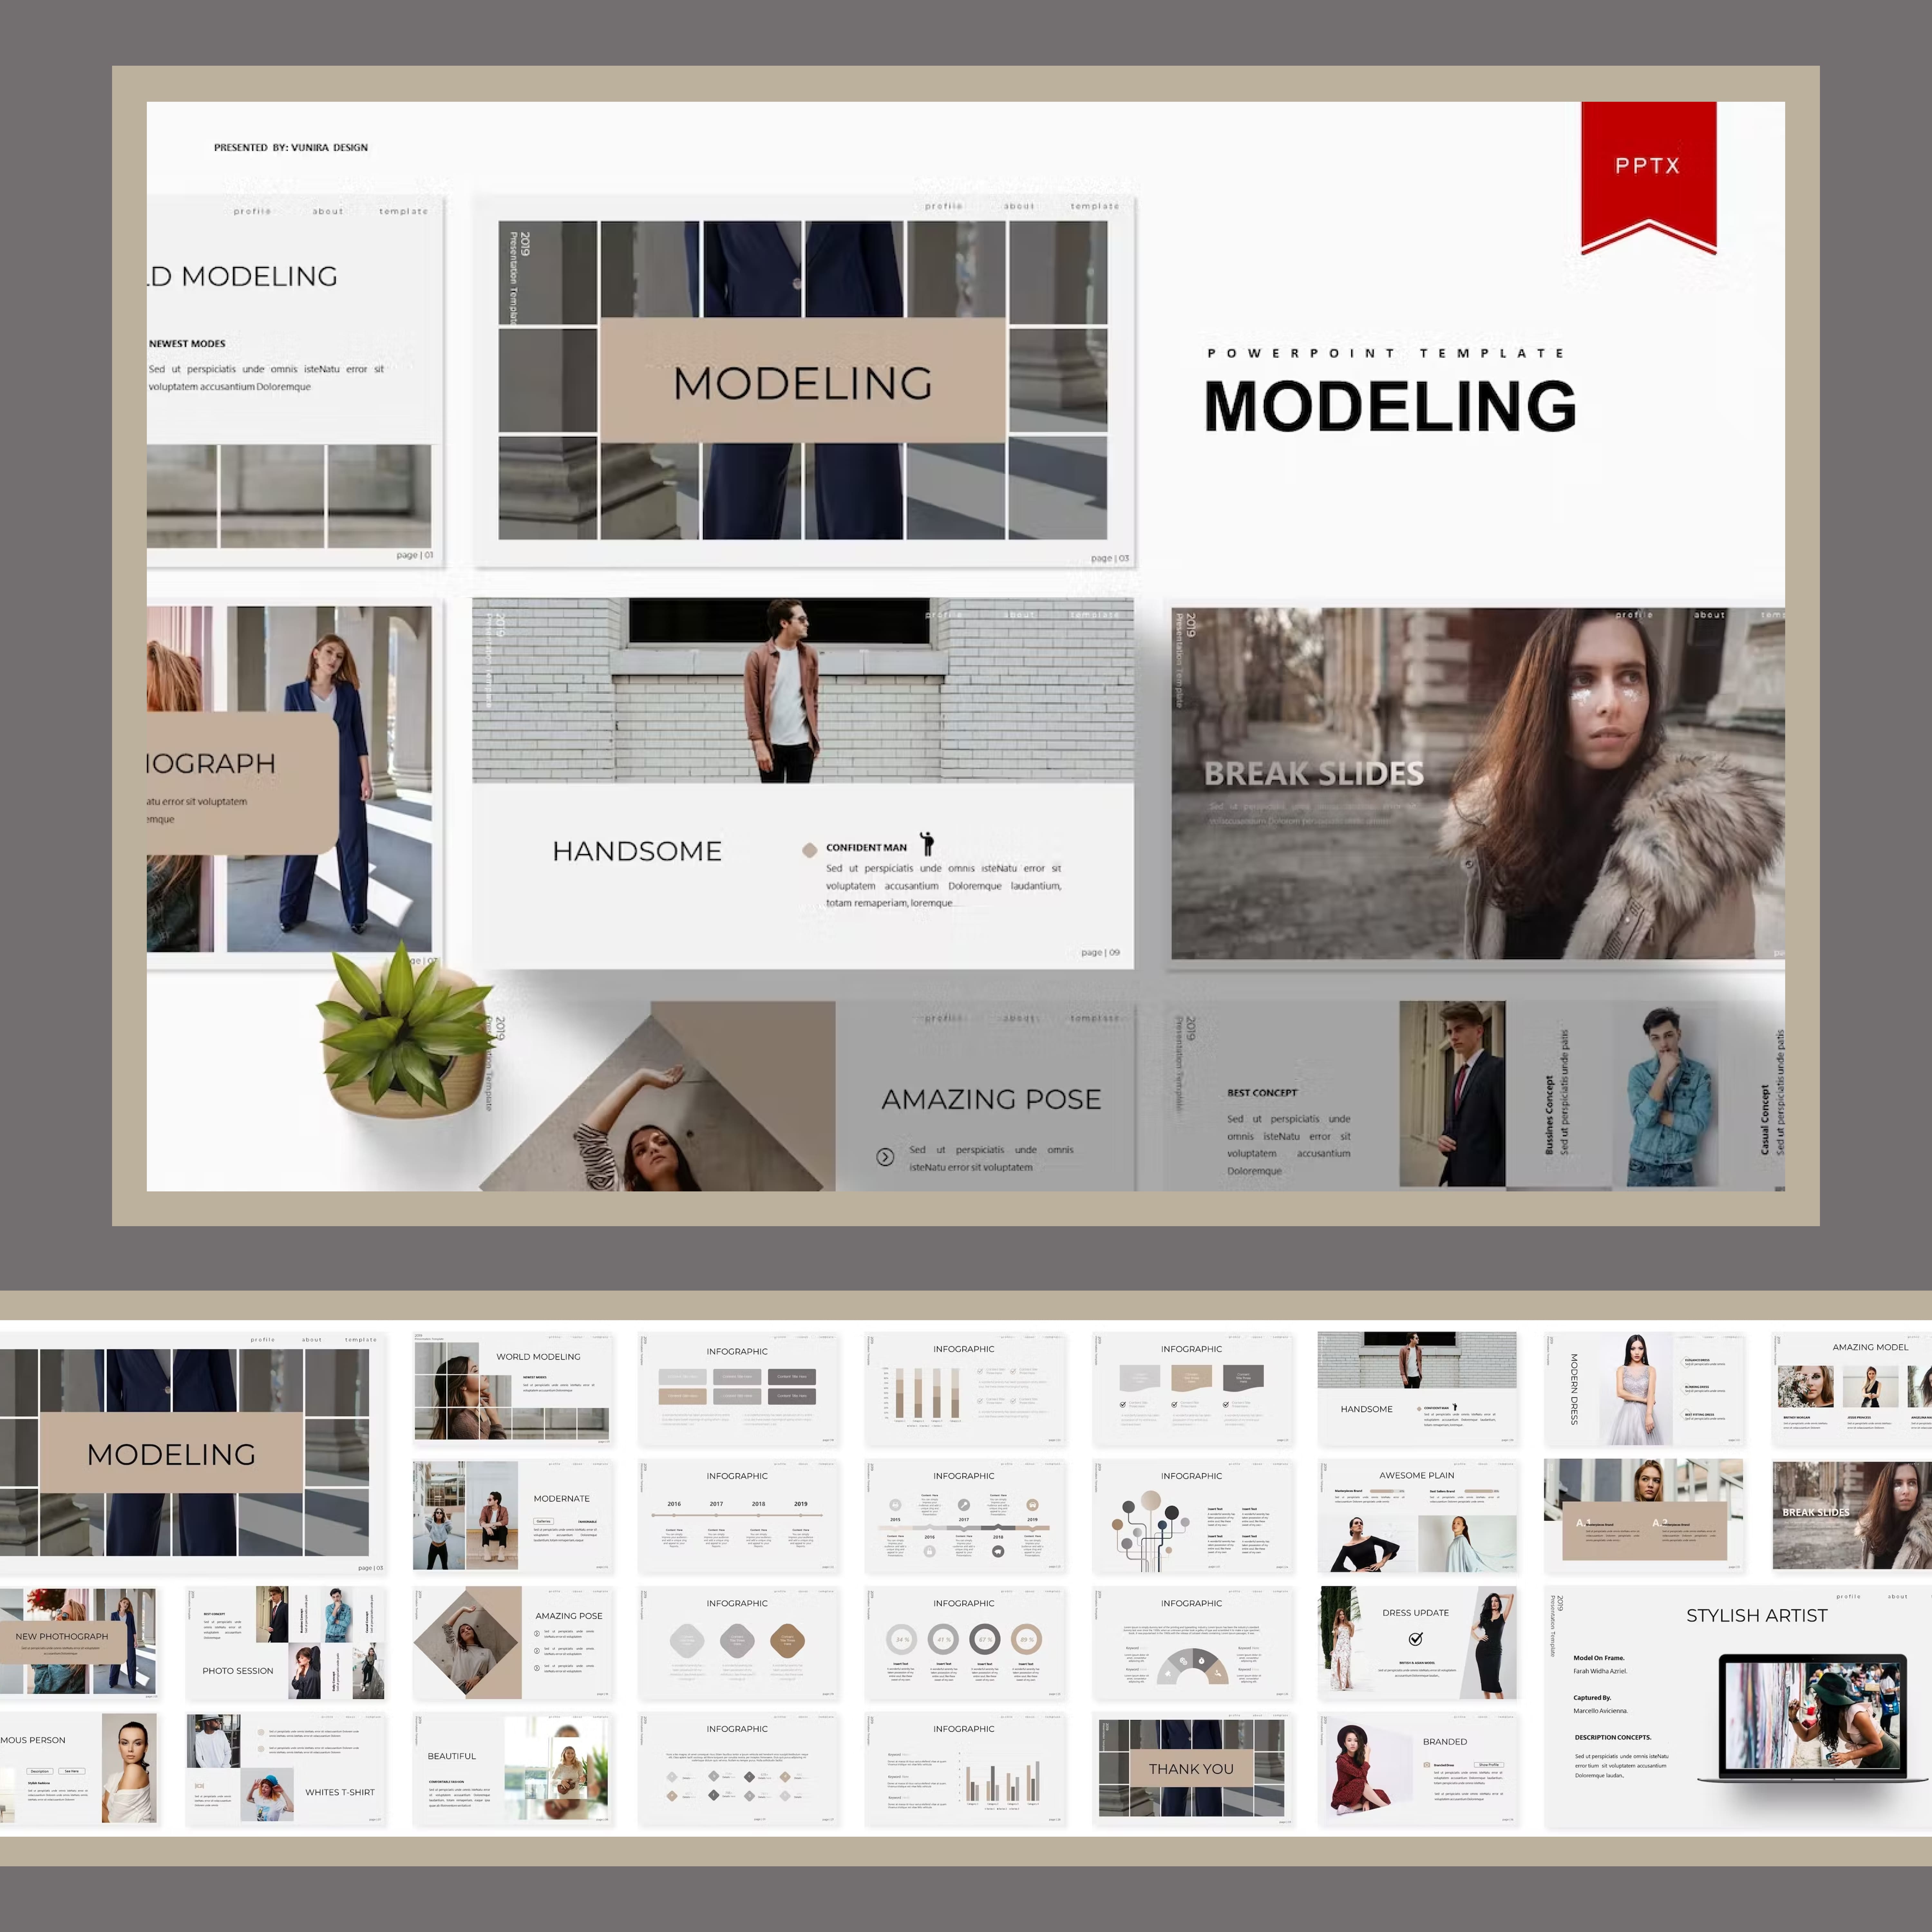 Modeling | Powerpoint Template Cover.